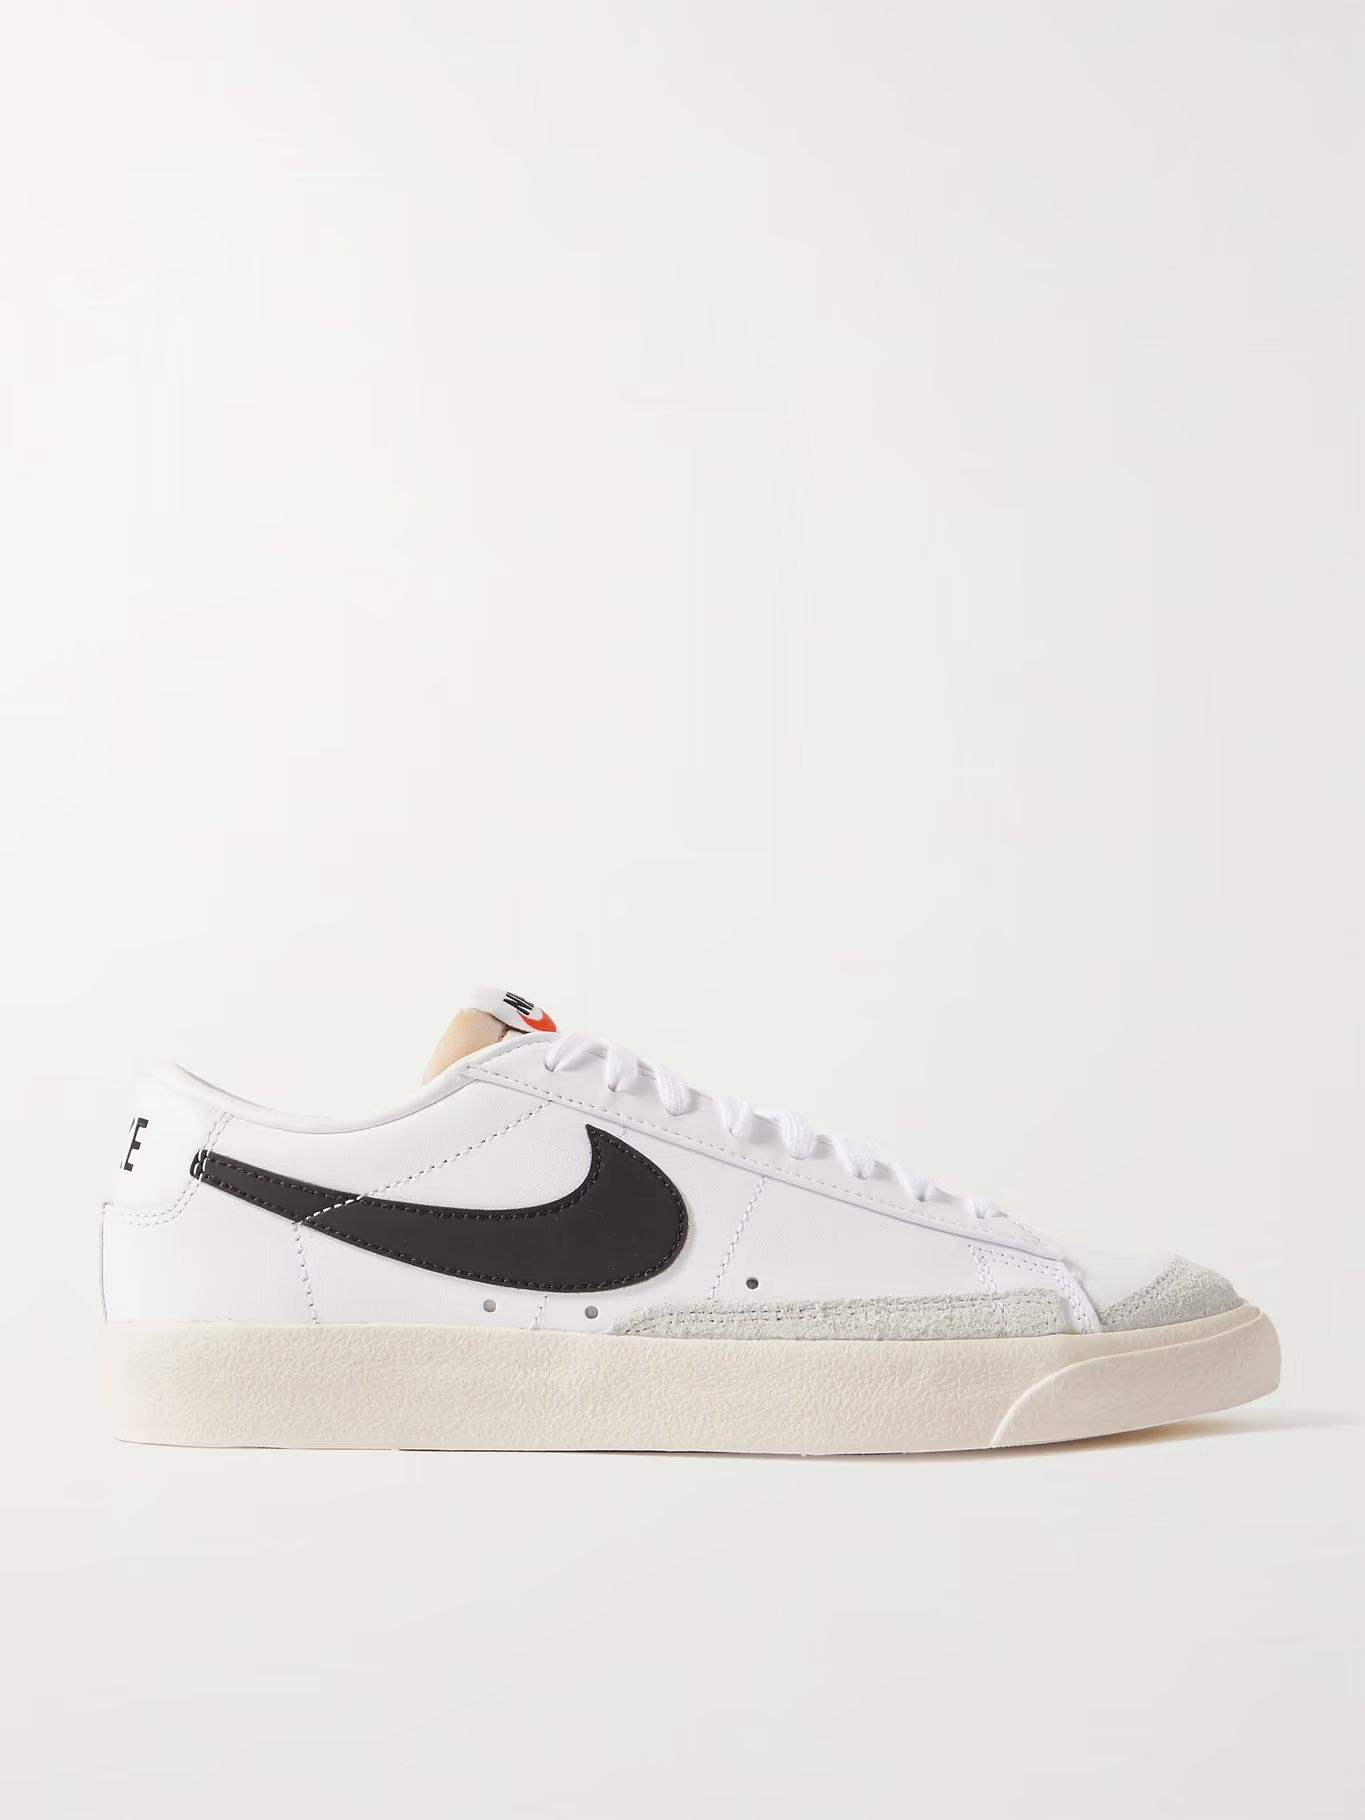 Blazer Low '77 Suede-Trimmed Leather Sneakers | Mr Porter (US & CA)